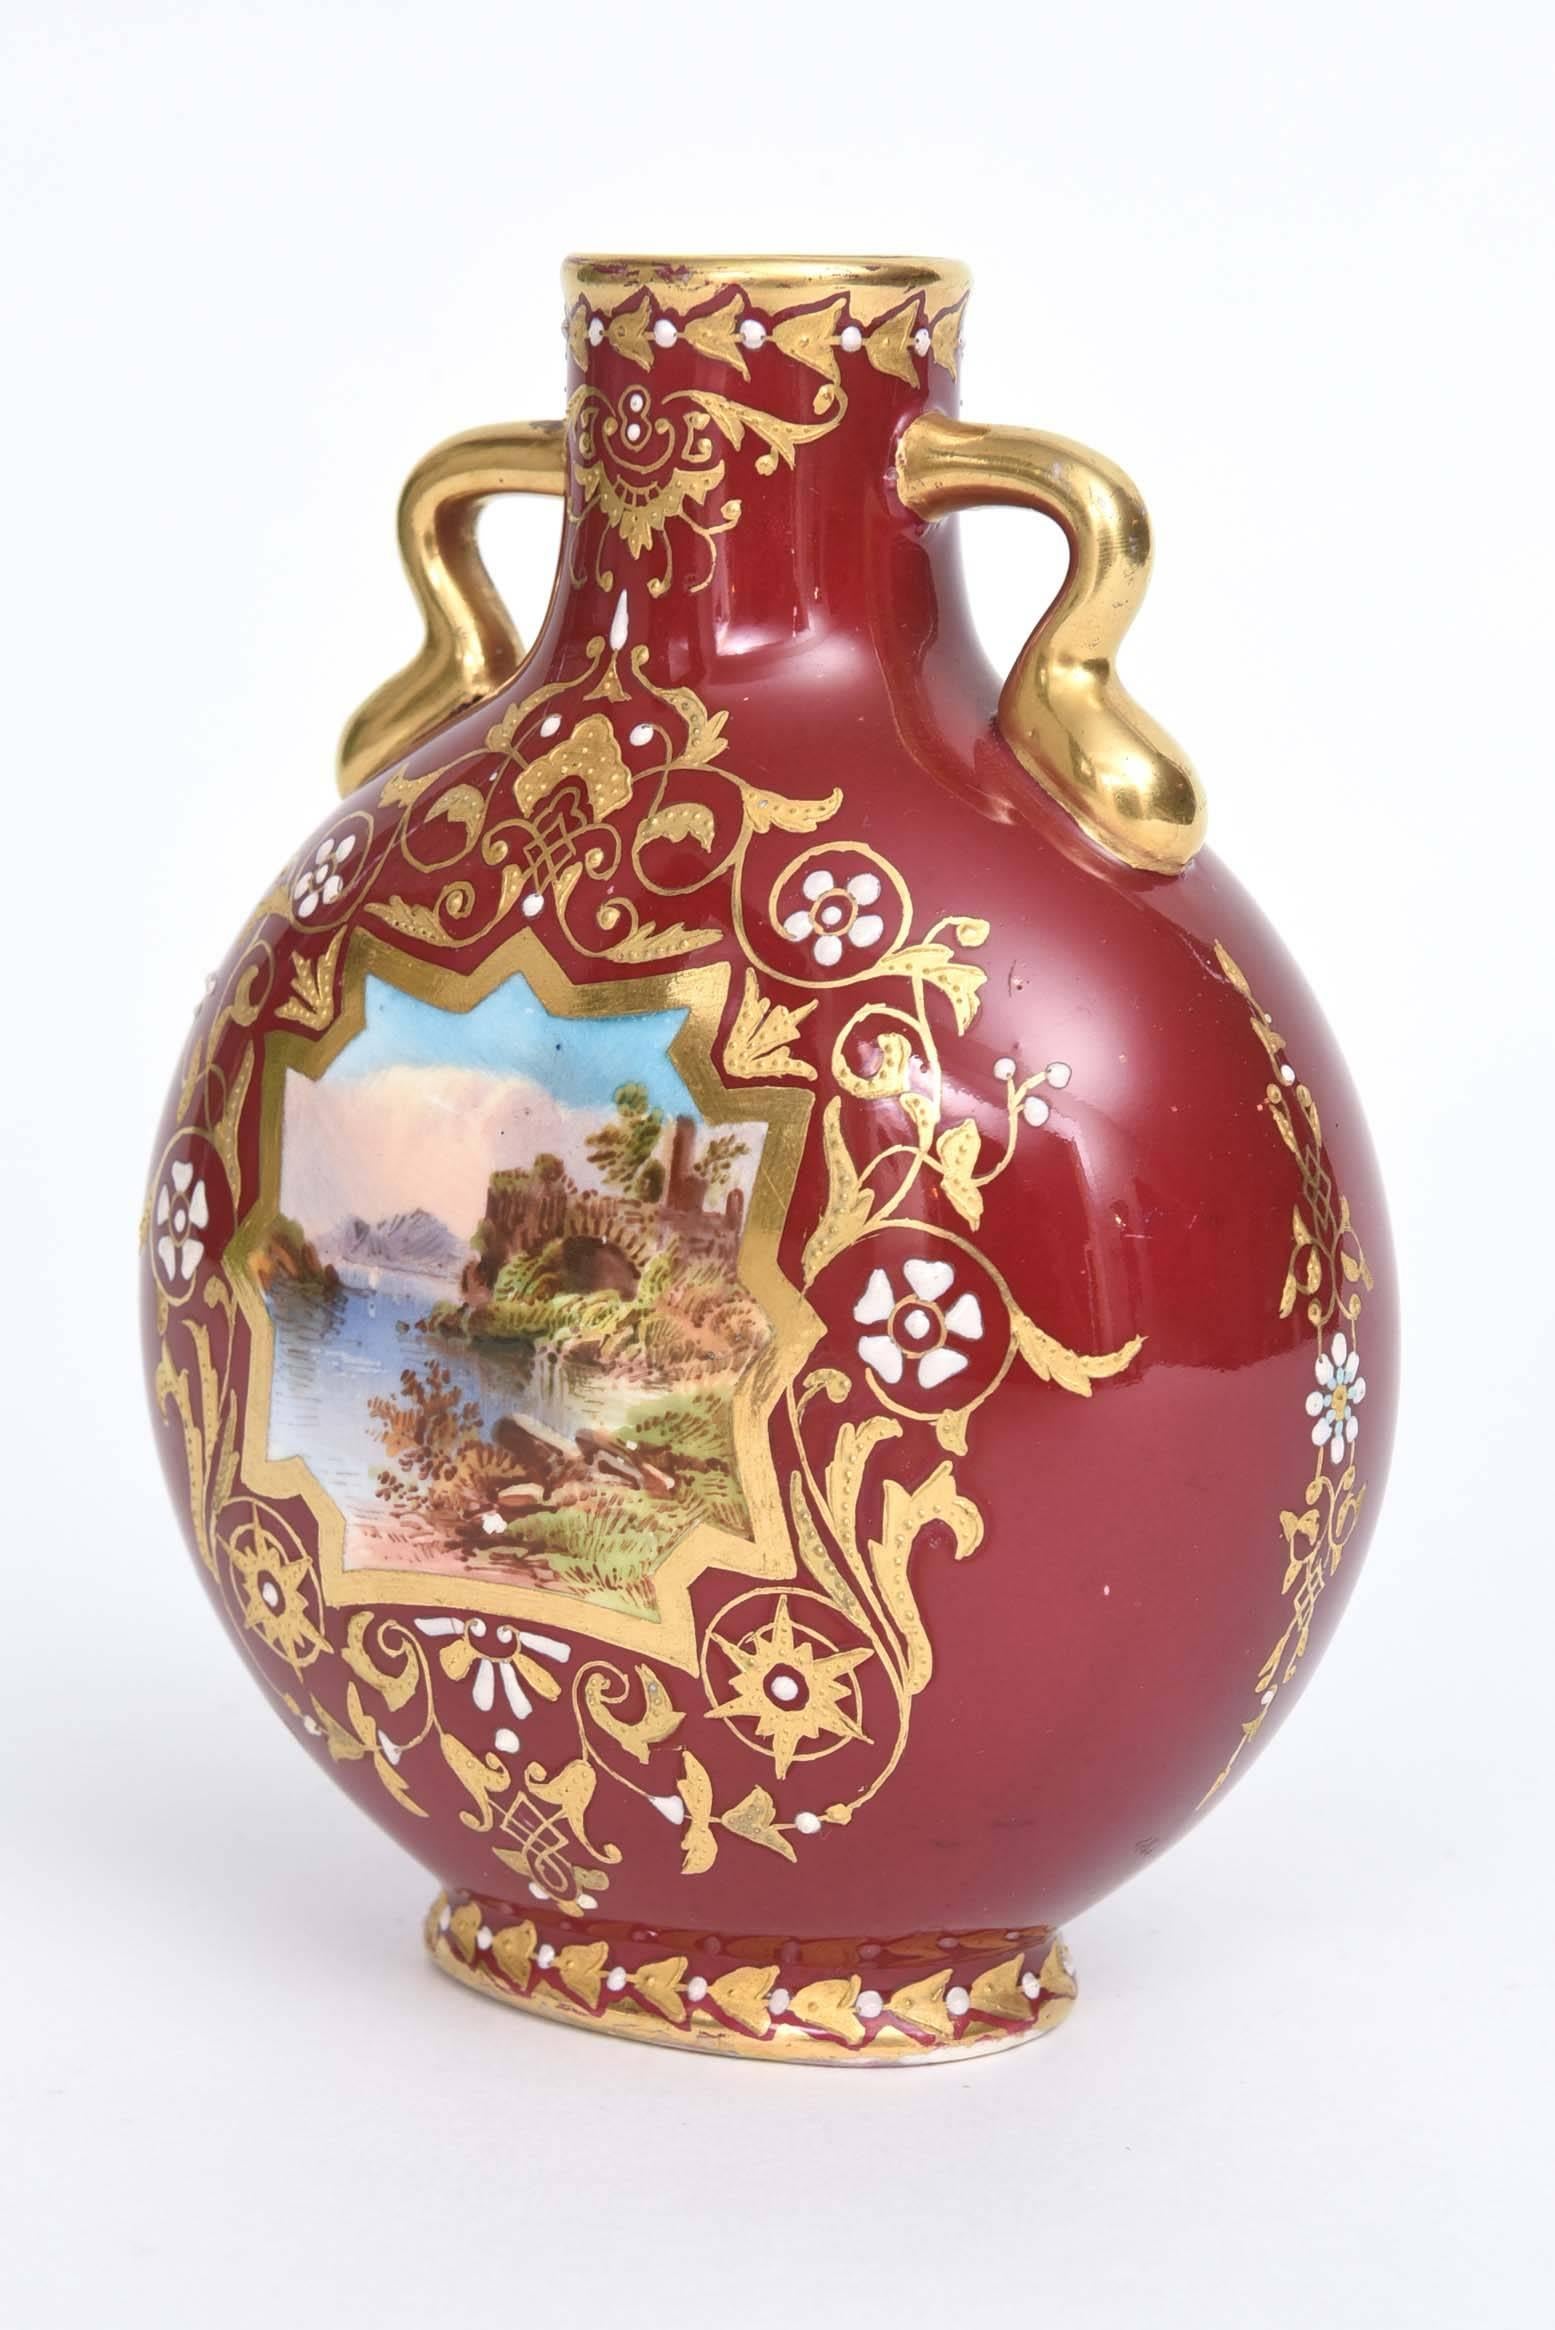 A charming vase by the storied English firm of Coalport. This sweetie features 2 handles, and an interesting hand painted scene with river, mountains, flora fauna accented with white jewels and raised tooled gilding on a rich ruby red ground. Custom